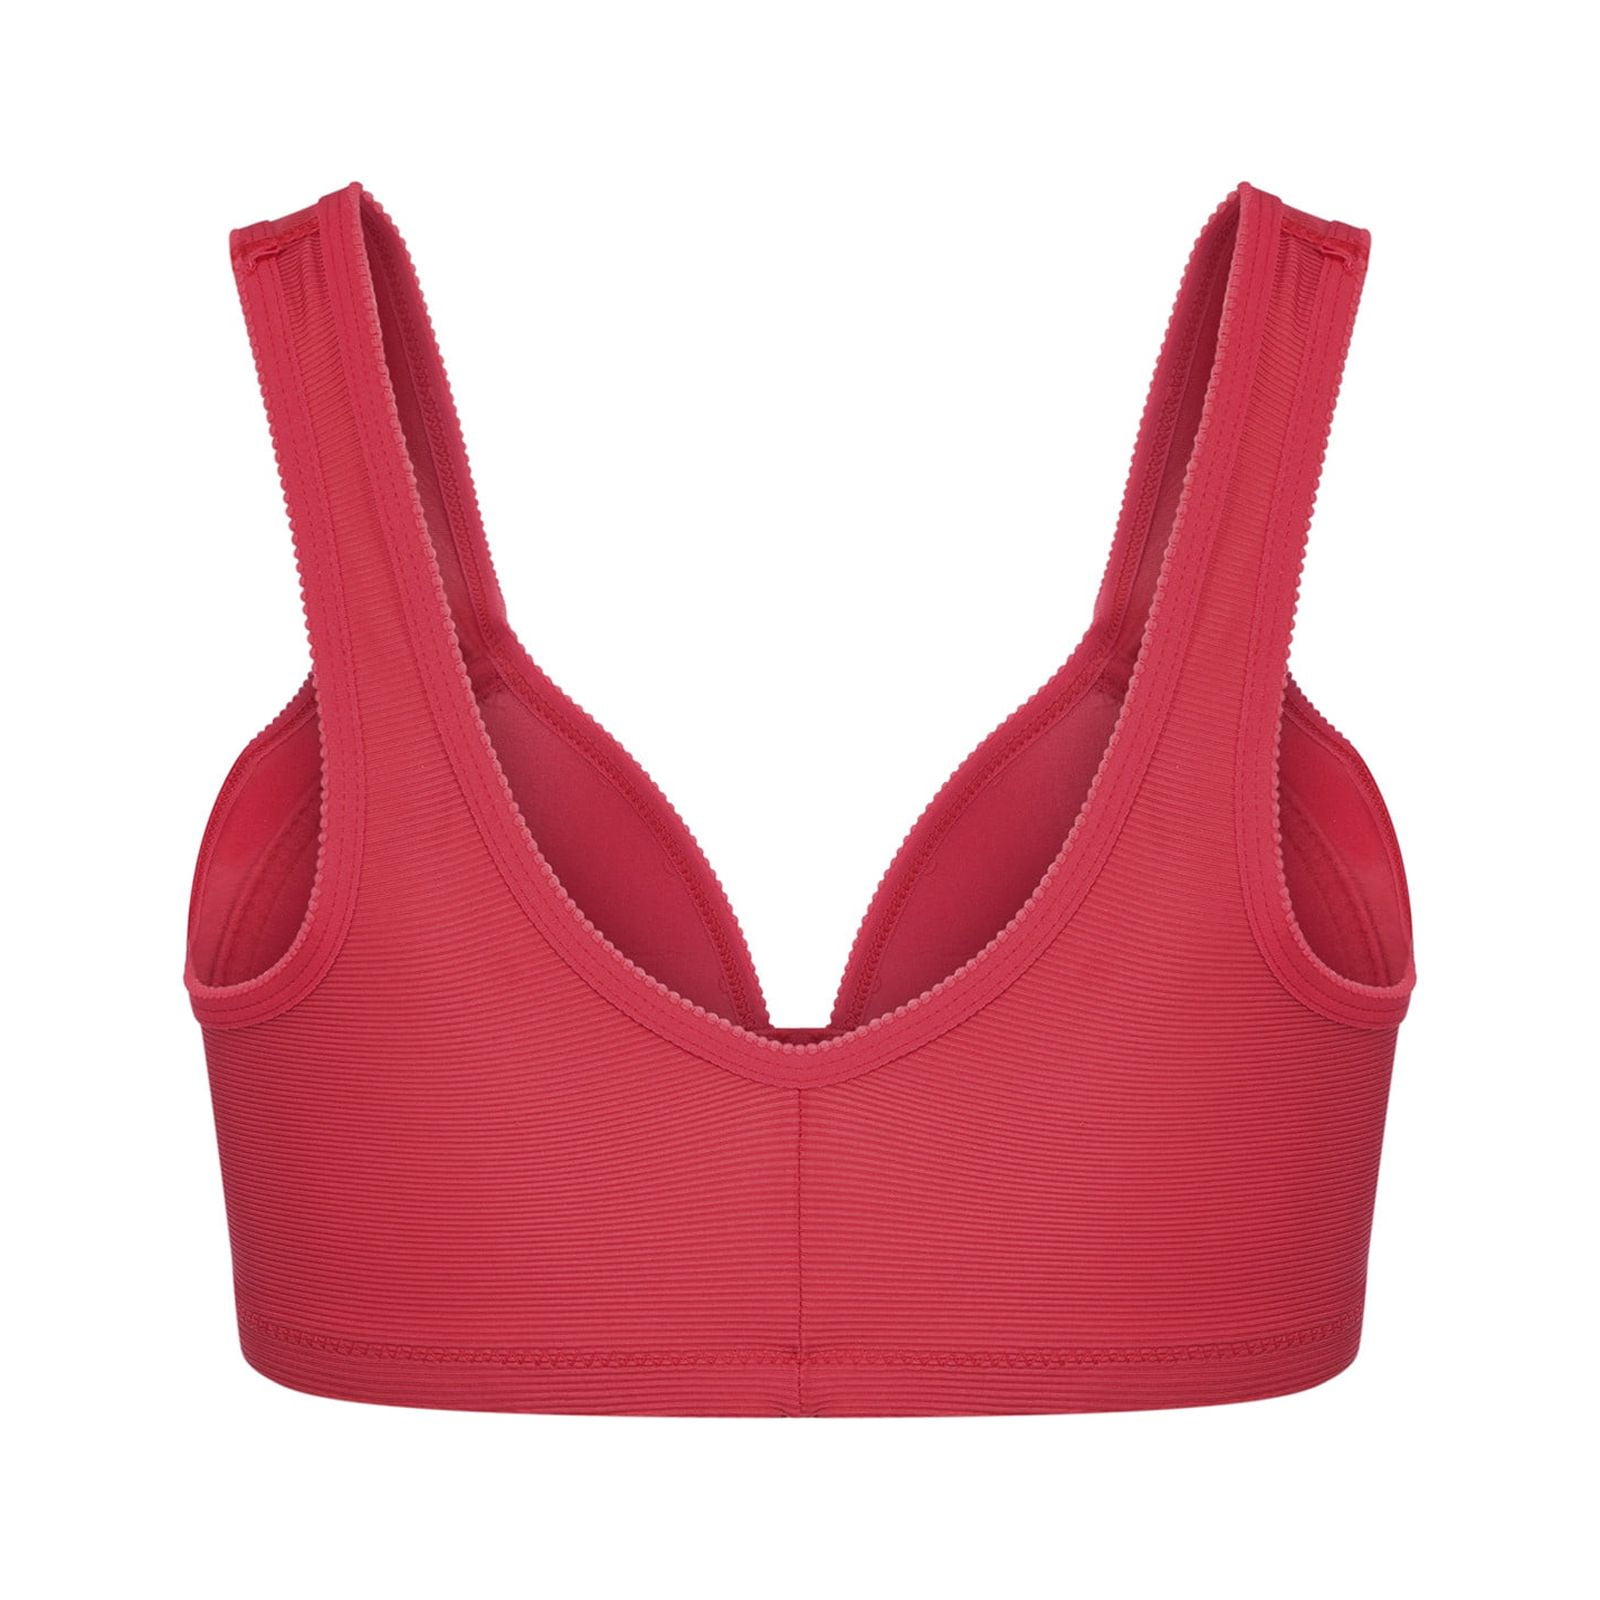 Kddylitq Cloud Bras Smoothing Seamless Full Bodysuit Lingerie Padded Buckle  Balconette Push Up Bra Bralette Placed Plus Size Supportive Push Up  Wireless Smoothing Comfortable Adjustable Bras Red M 